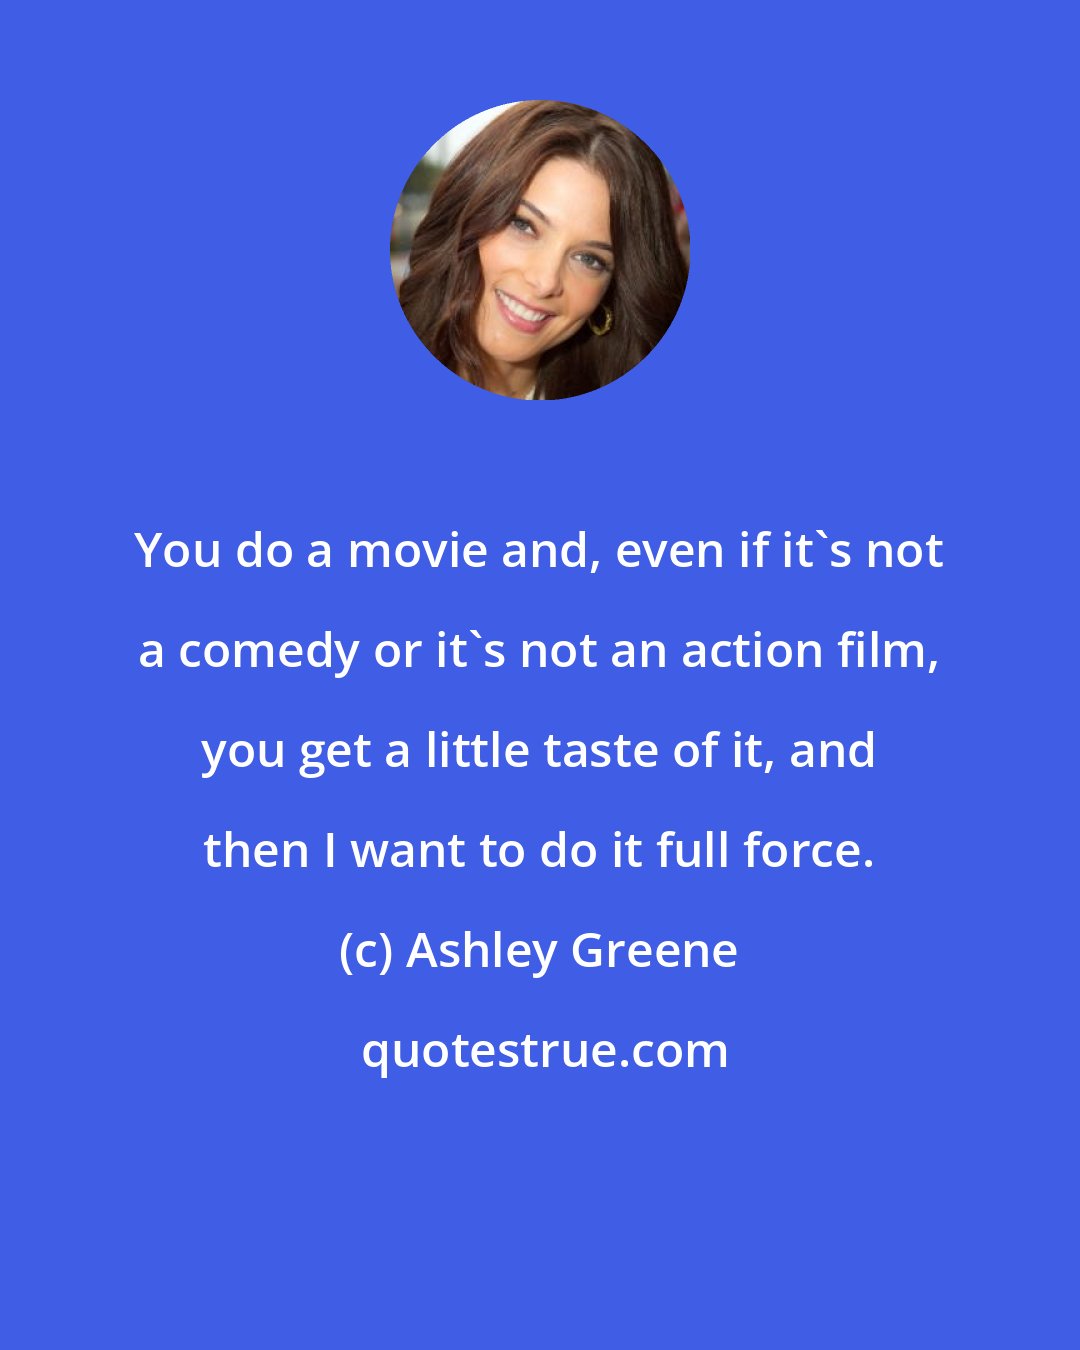 Ashley Greene: You do a movie and, even if it's not a comedy or it's not an action film, you get a little taste of it, and then I want to do it full force.